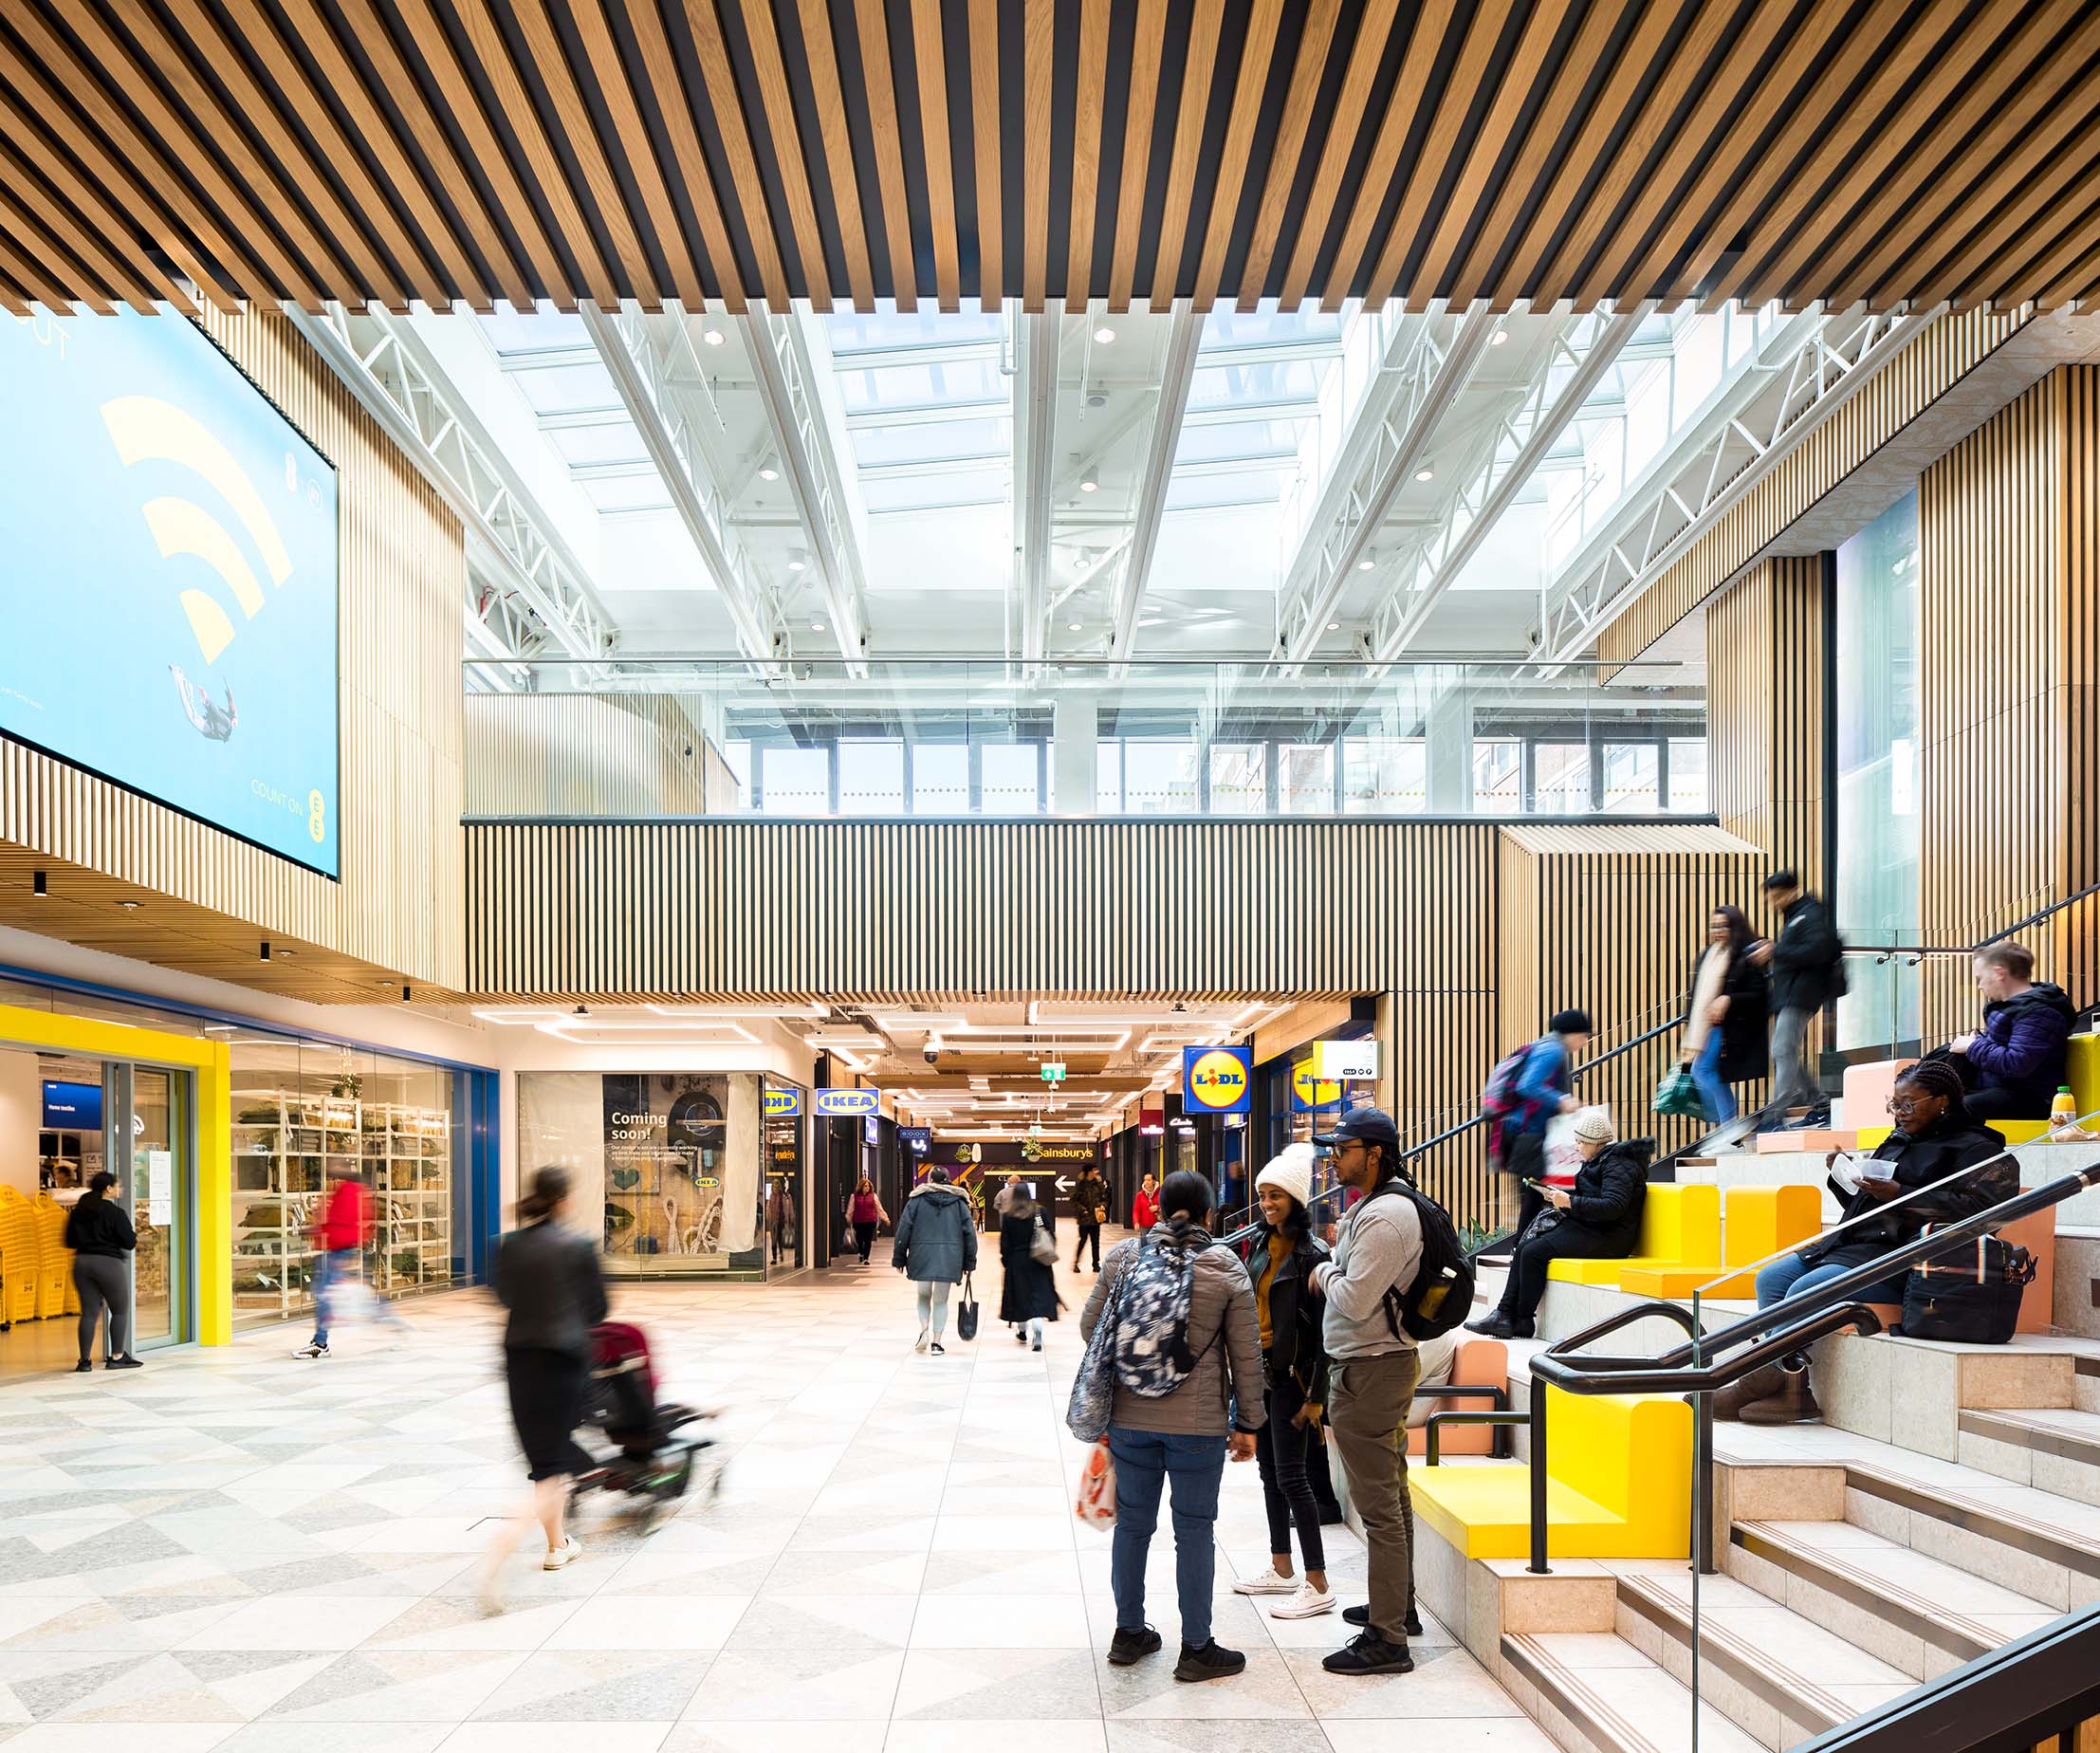 Transforming an old 1970s shopping centre into the new Livat Mall has now created a warm and inviting gathering place for the local community.